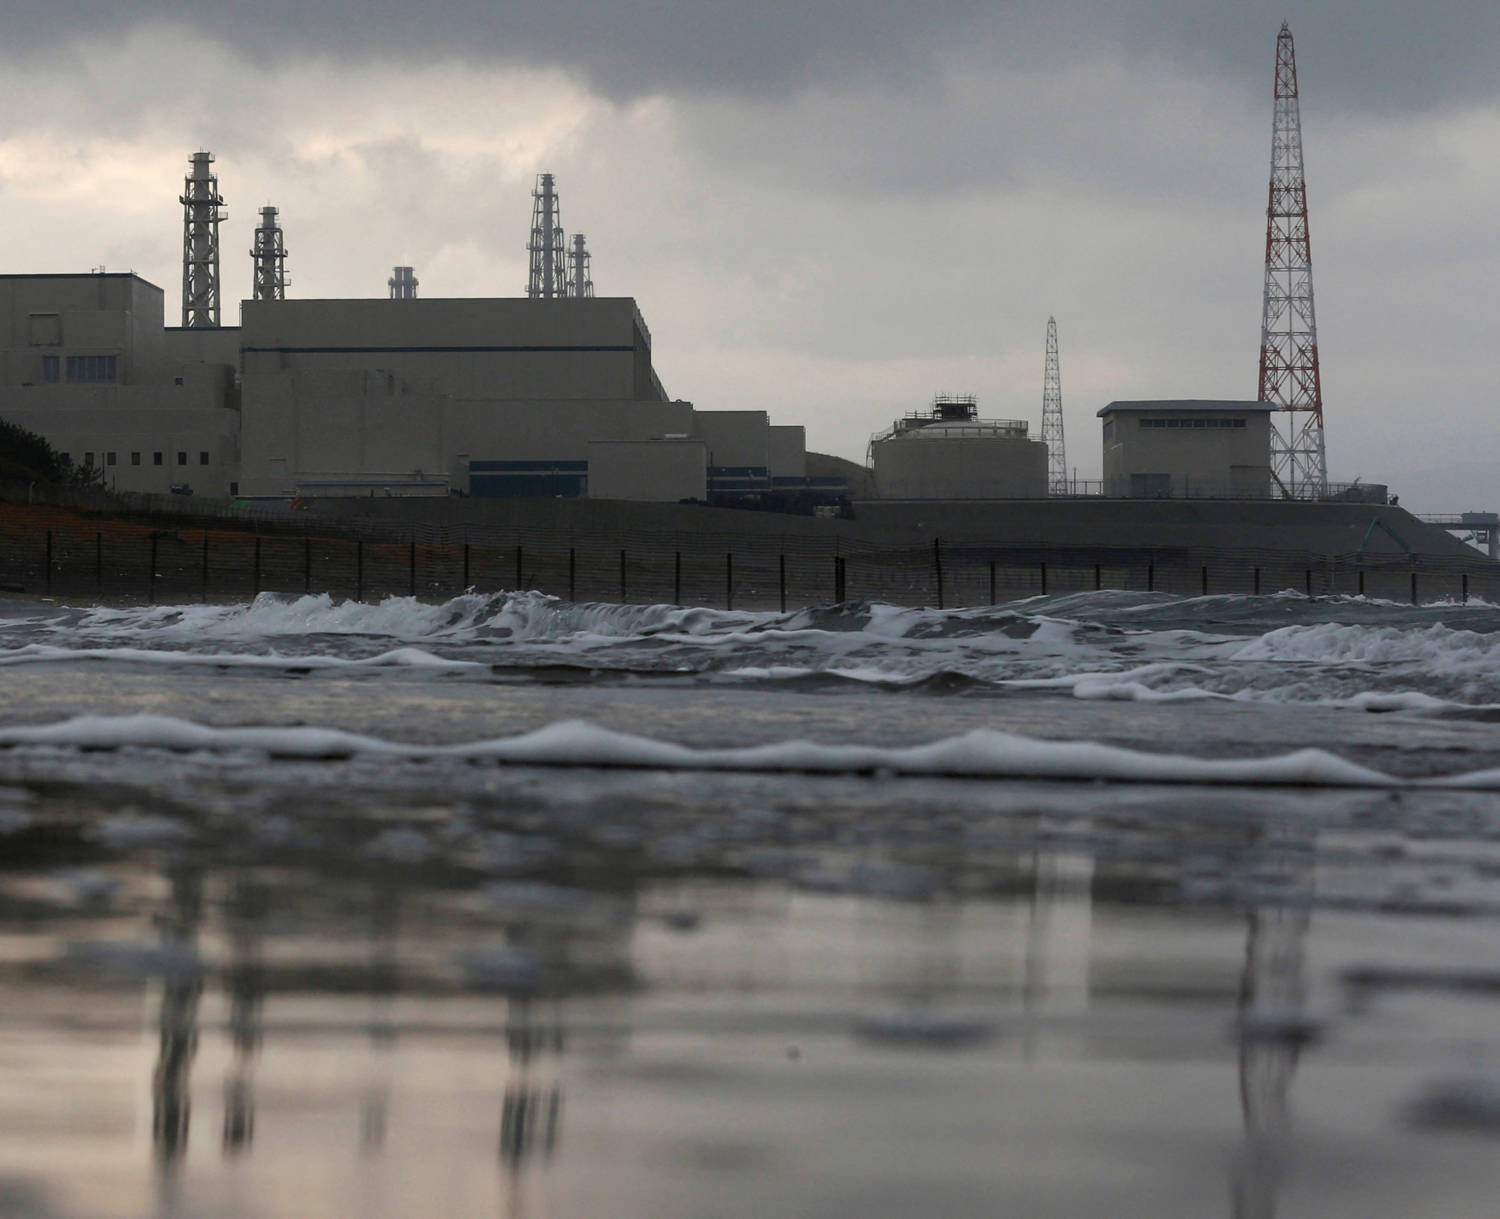 File Photo: Tokyo Electric Power Co.'s Kashiwazaki Kariwa Nuclear Power Plant, Which Is The World's Biggest, Is Seen From A Seaside In Kashiwazaki